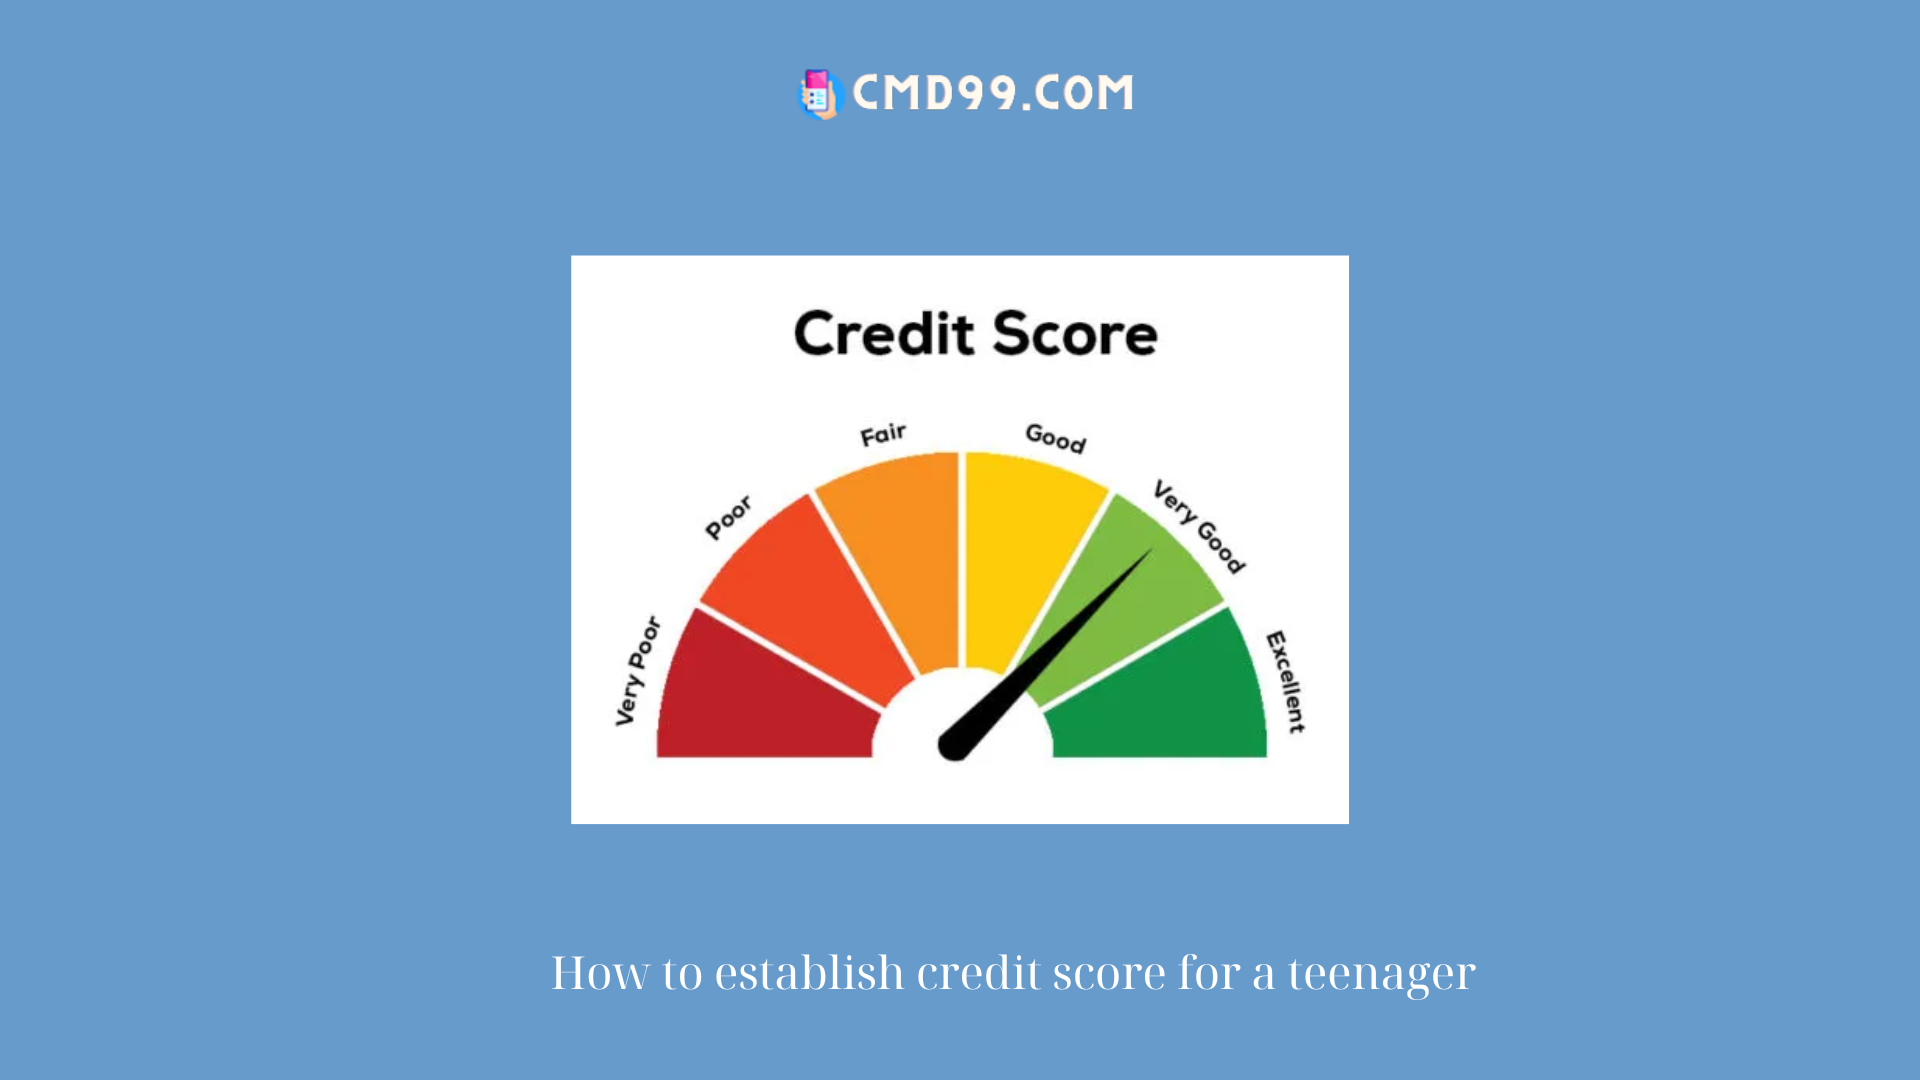 How to establish credit score for a teenager